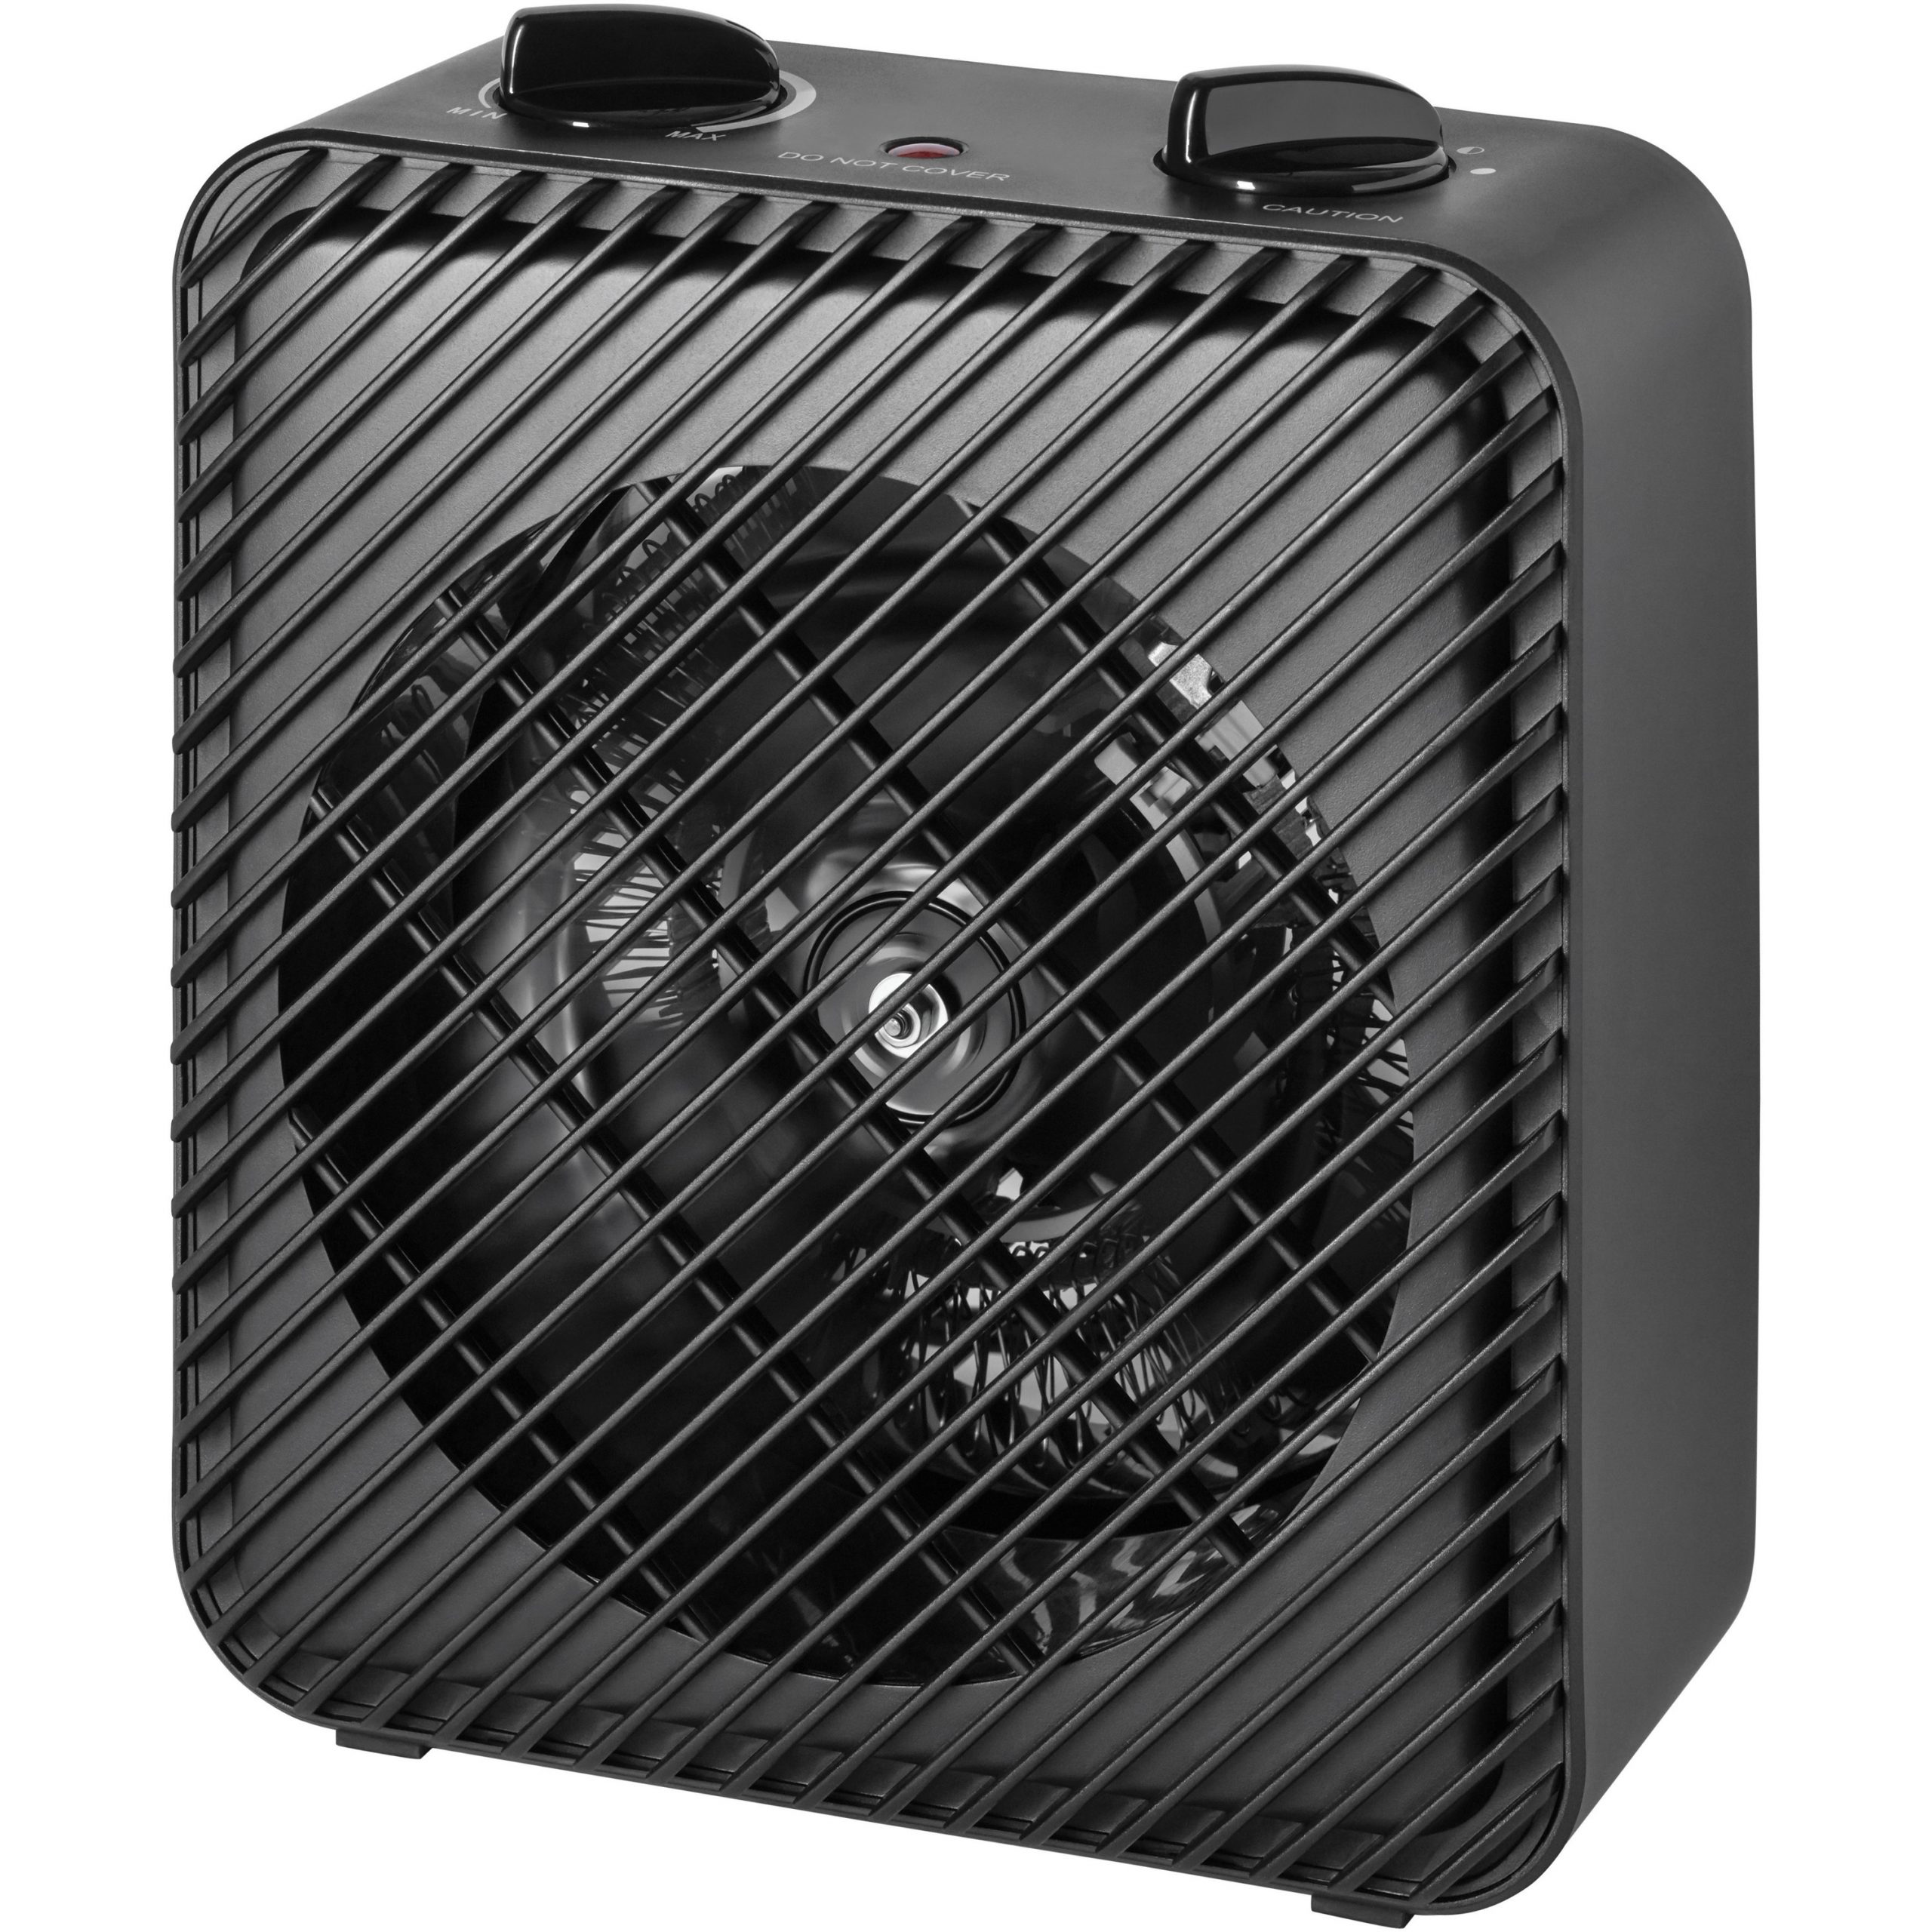 Mainstays Electric Fan Heater Black Hf 1008b pertaining to size 3000 X 3000